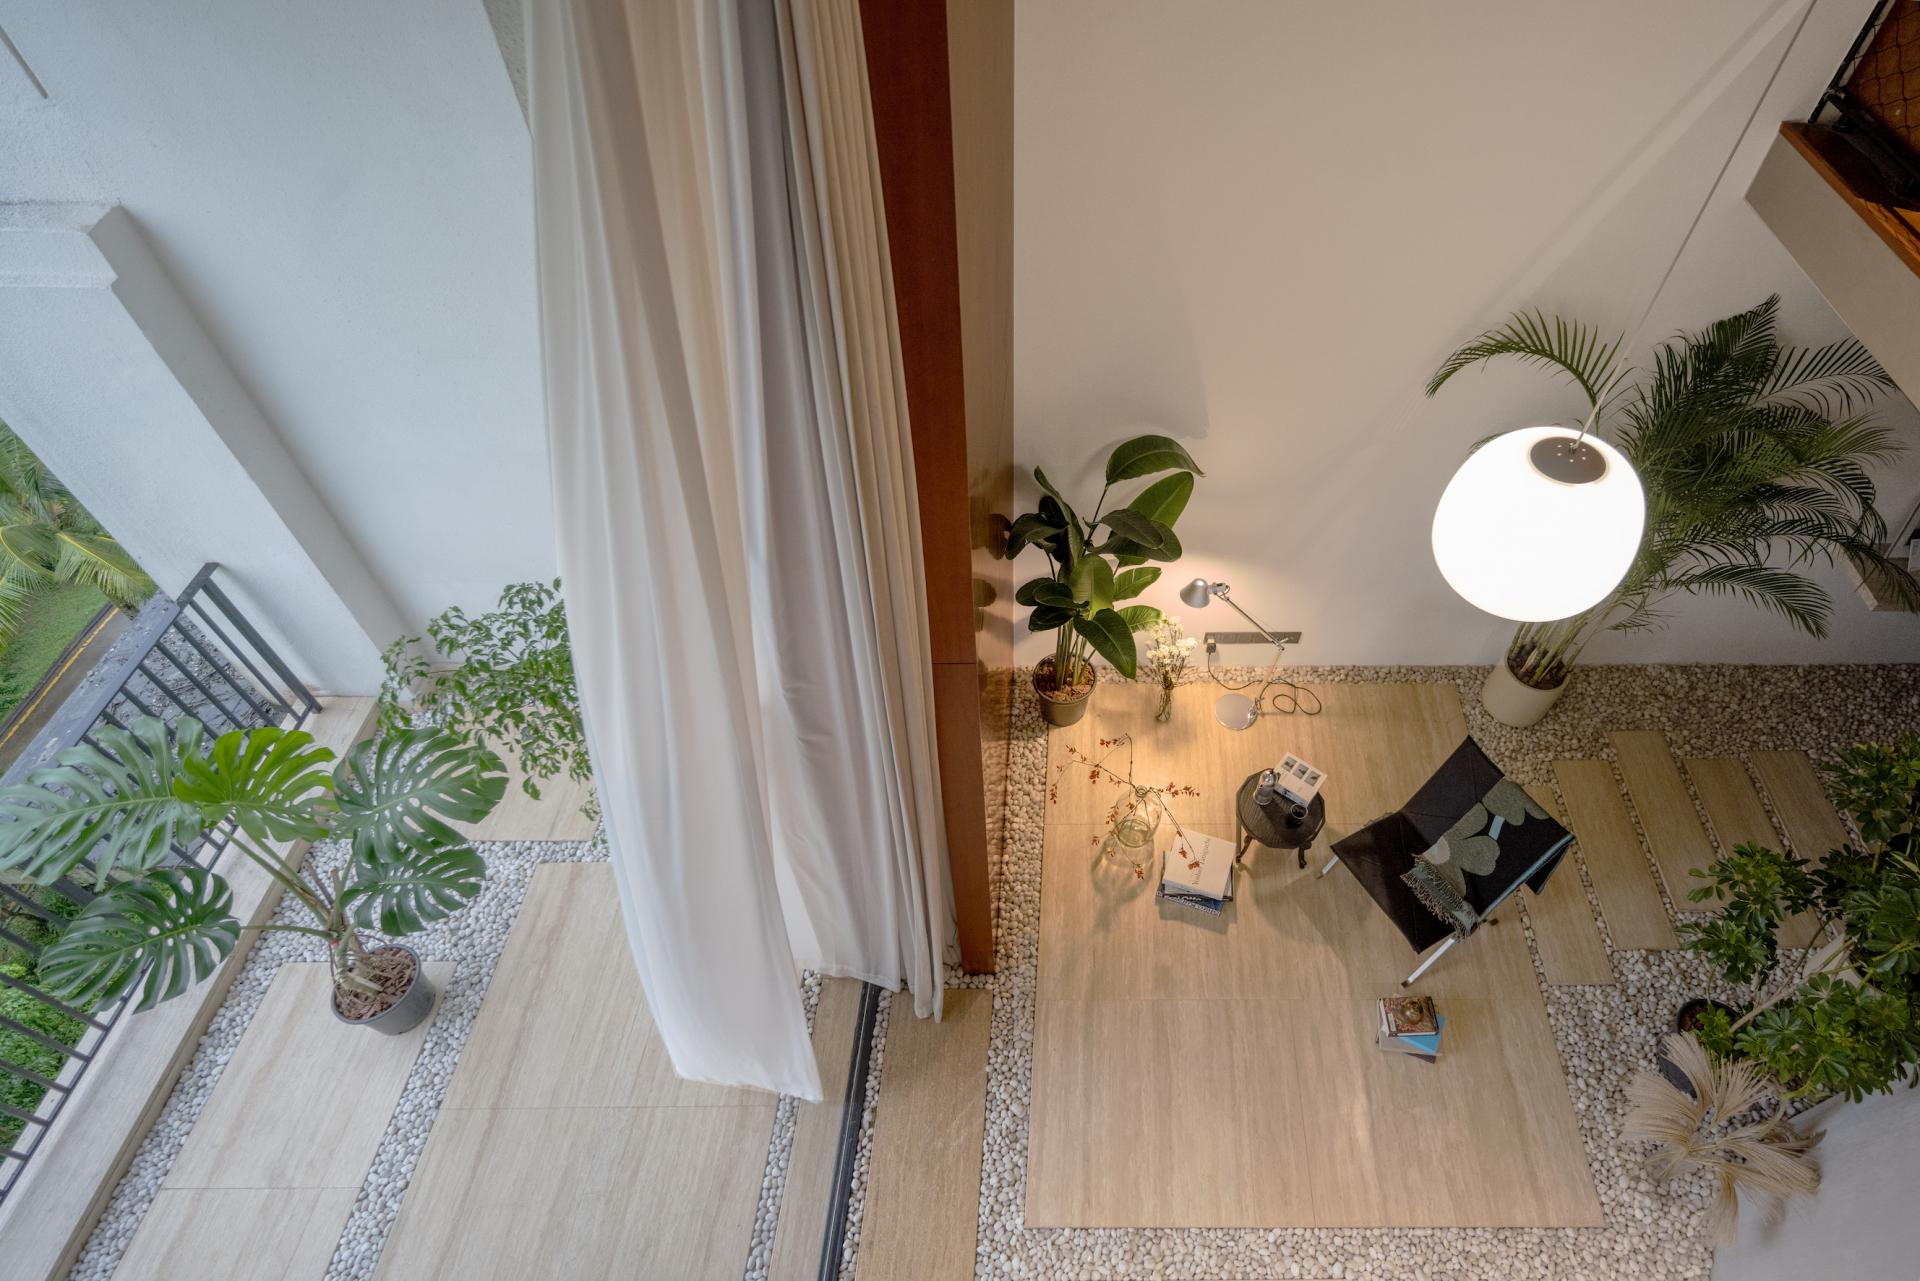 Escape to Tranquility: Tour a Breathtaking 1600 sq ft Garden Loft in Haikou, China